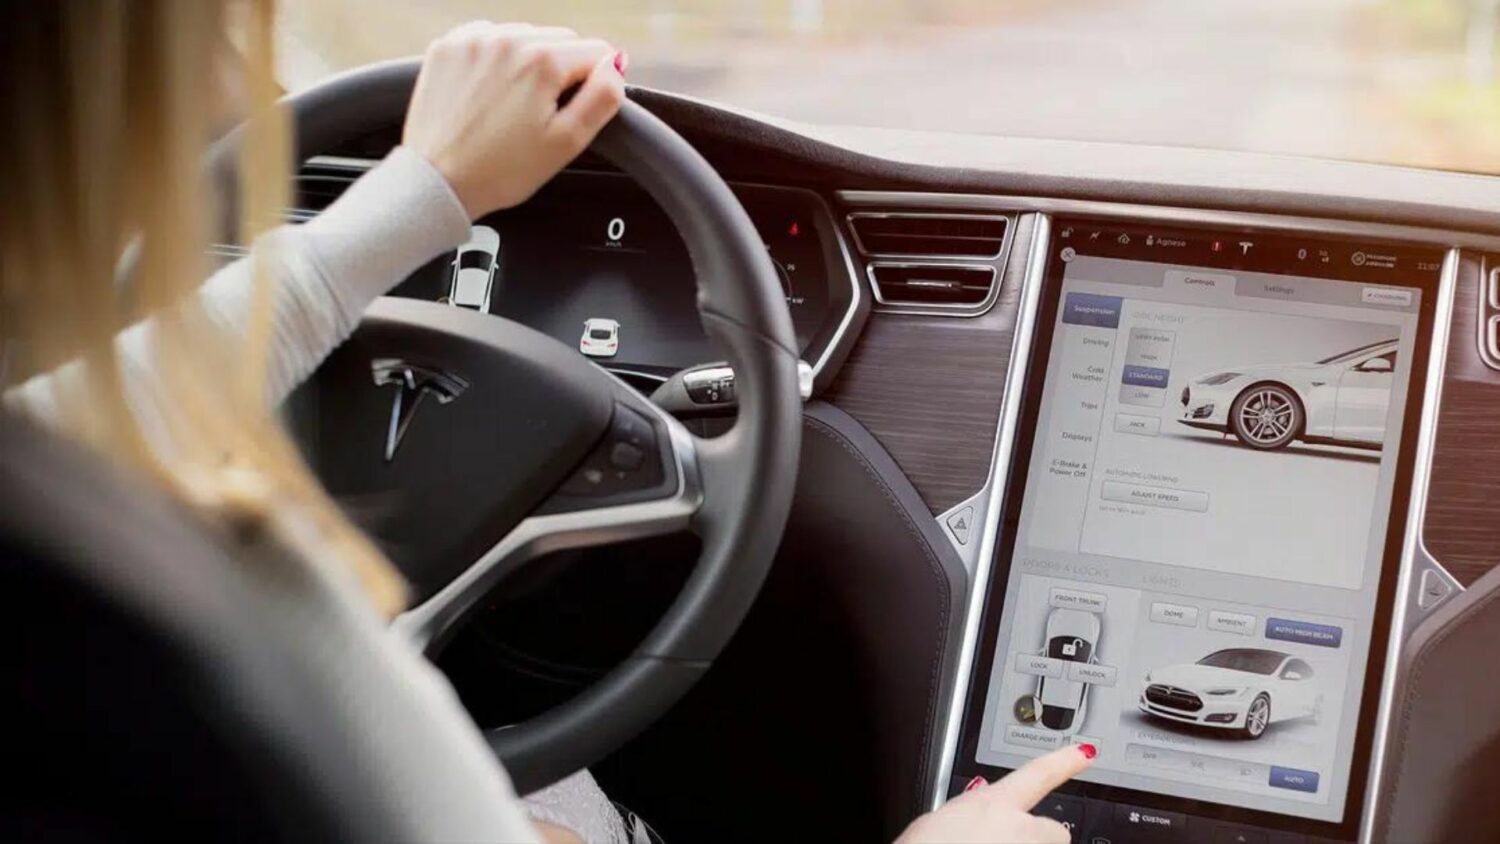 For the first time, Tesla will defend itself in court against claims that the Autopilot driver assistance system was the cause of a fatal crash.